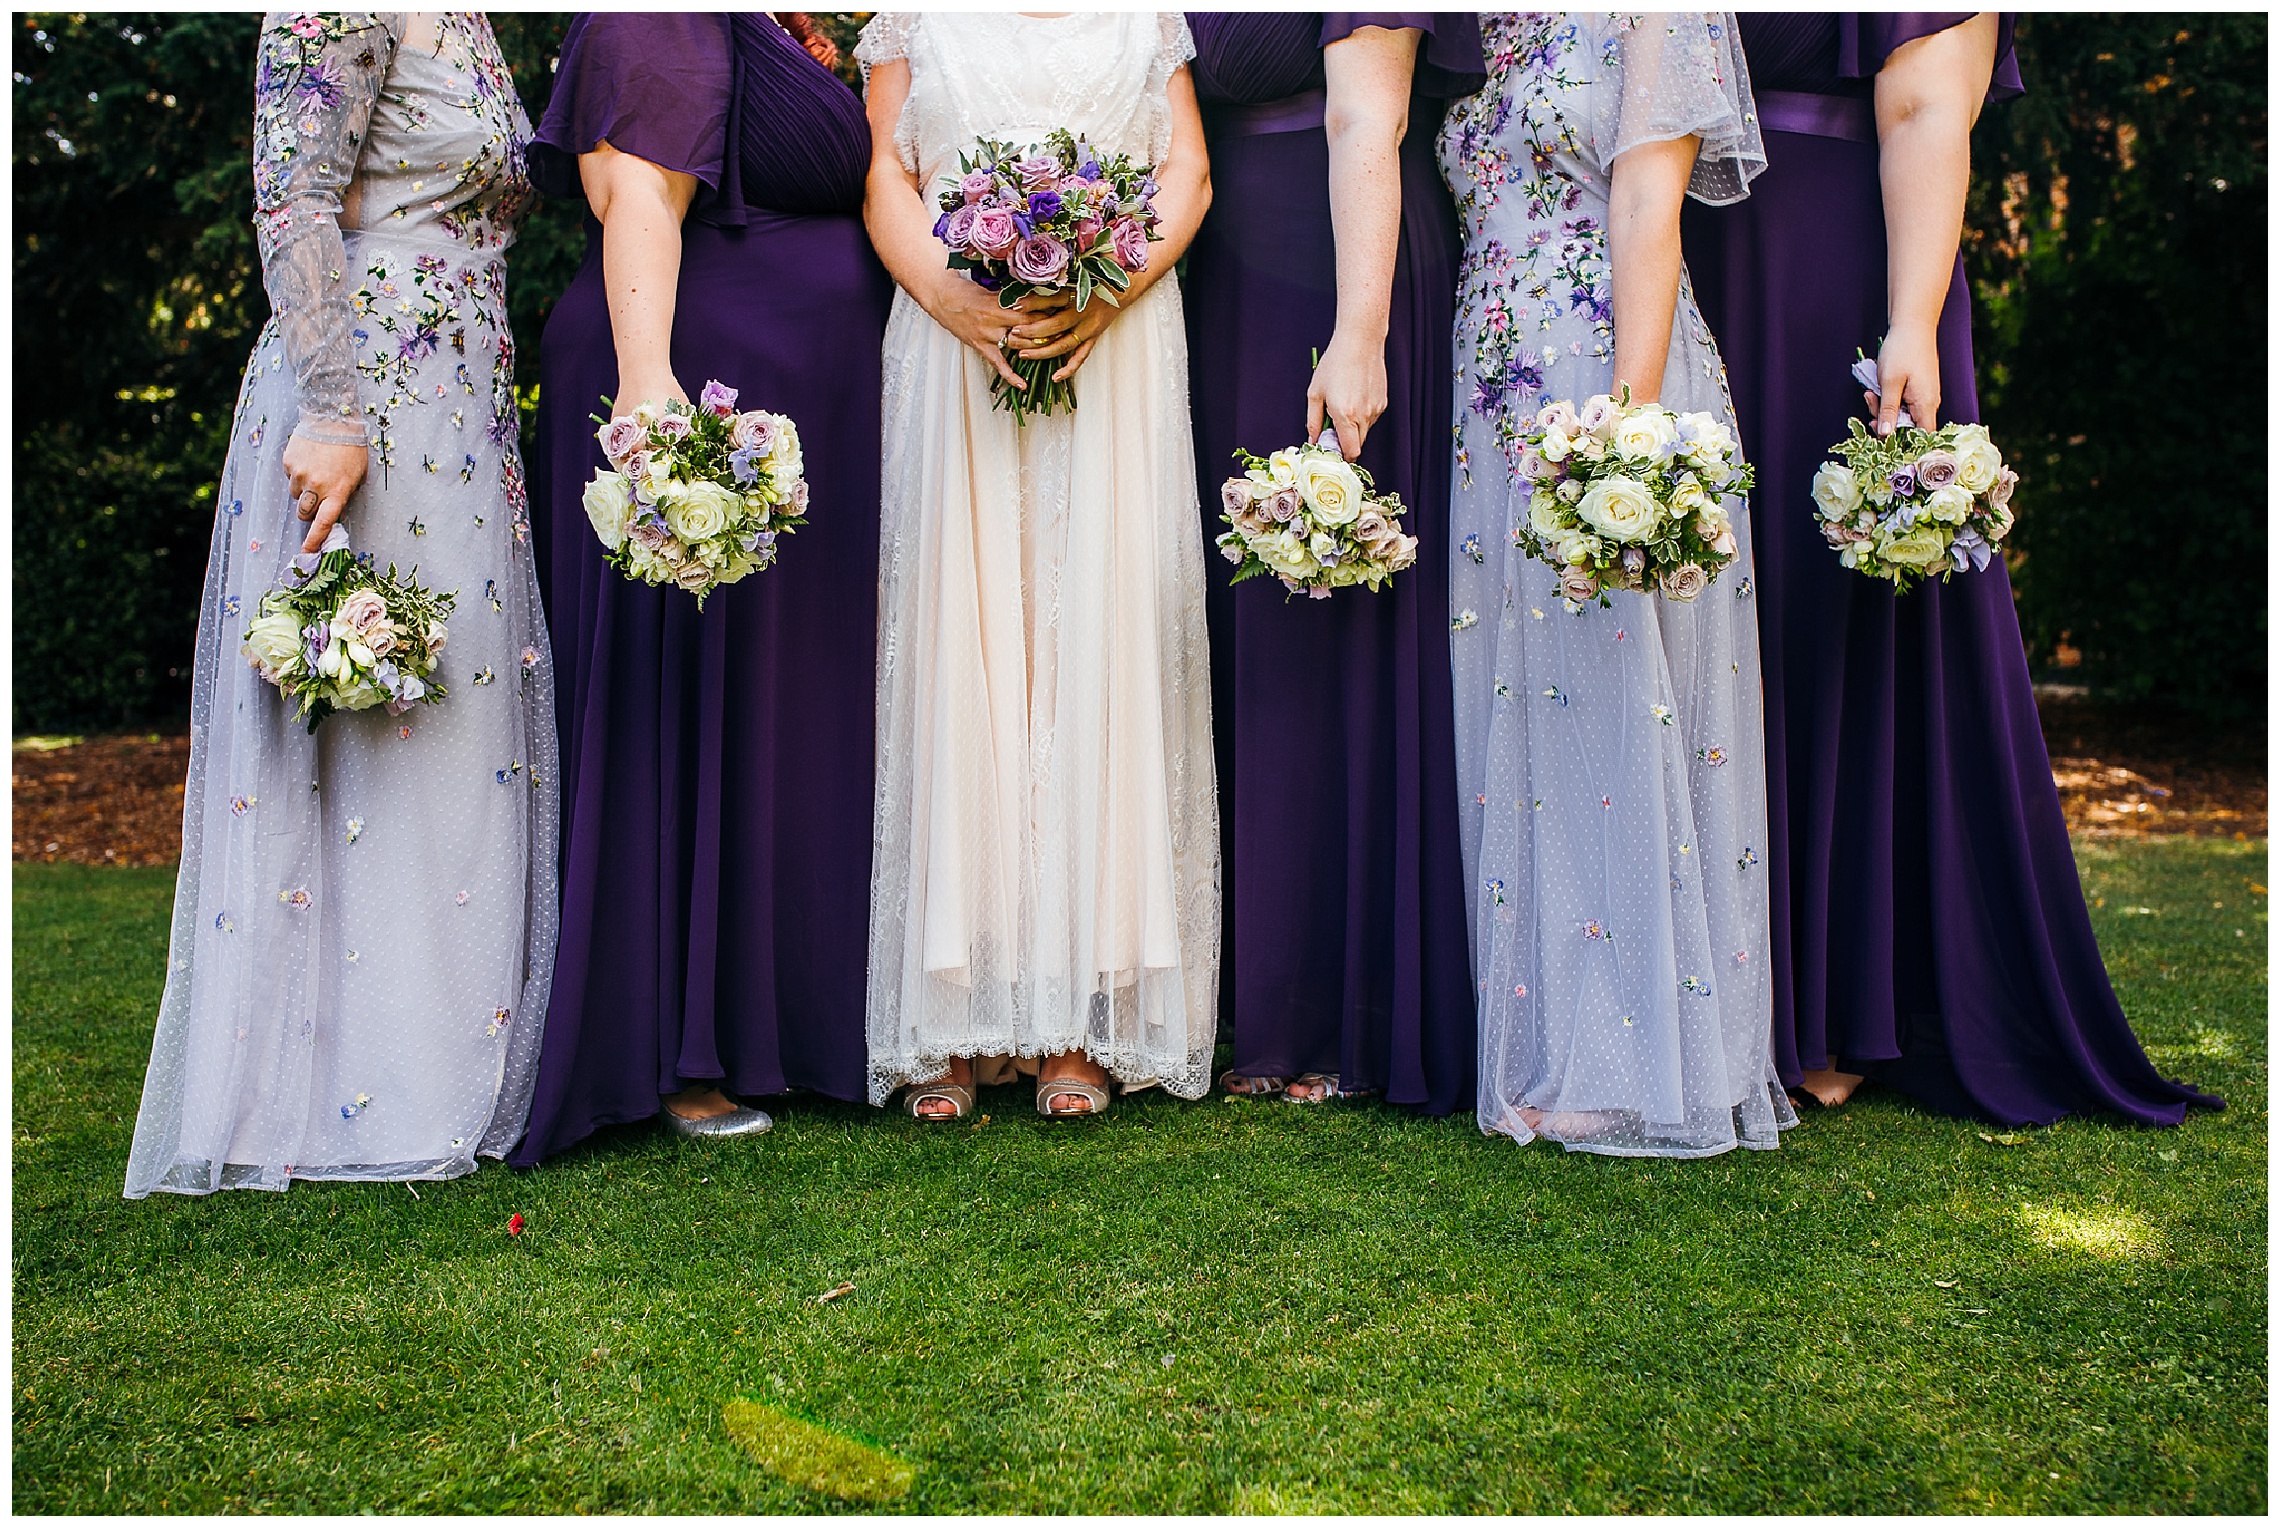 purple bridesmaids dresses of different shades with white bouquets